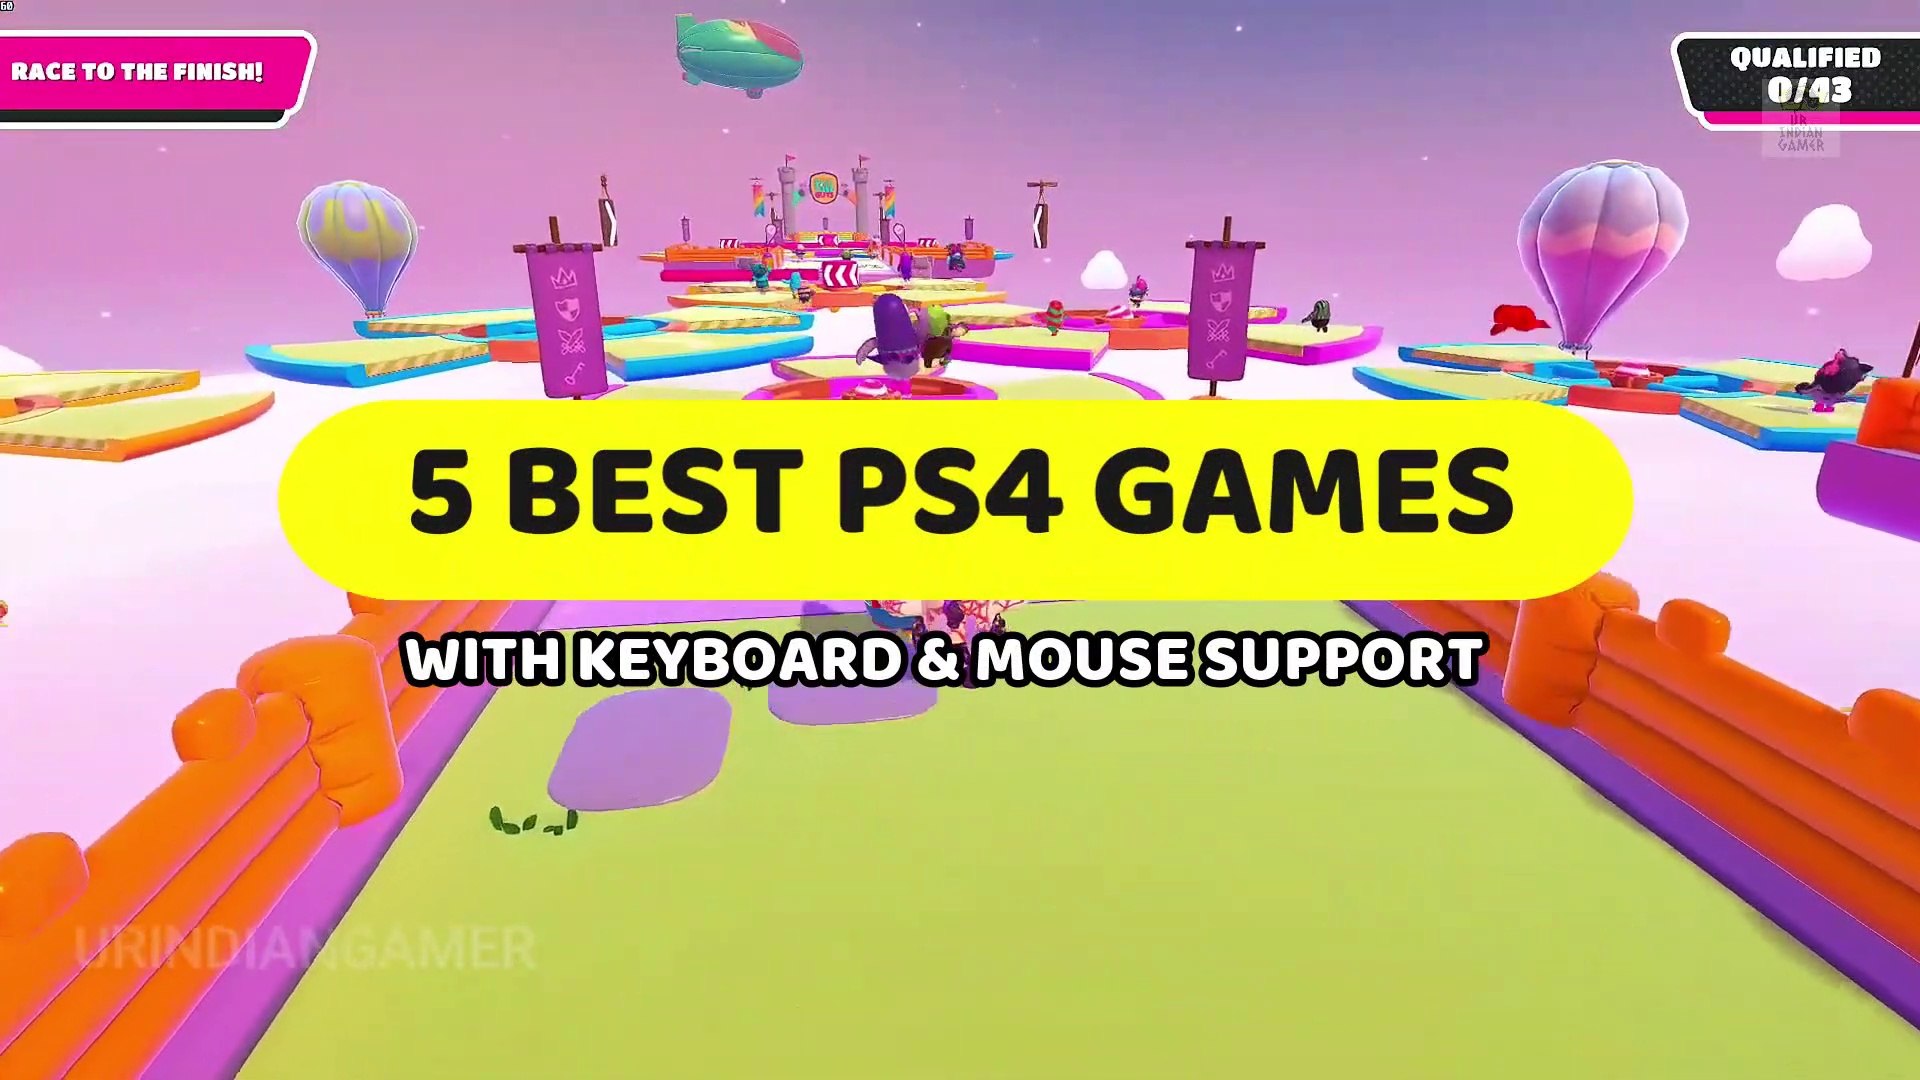 5 PS4 Games with Keyboard And Mouse Support - PS4 Games with Keyboard Mouse Support- Part 1 - video Dailymotion